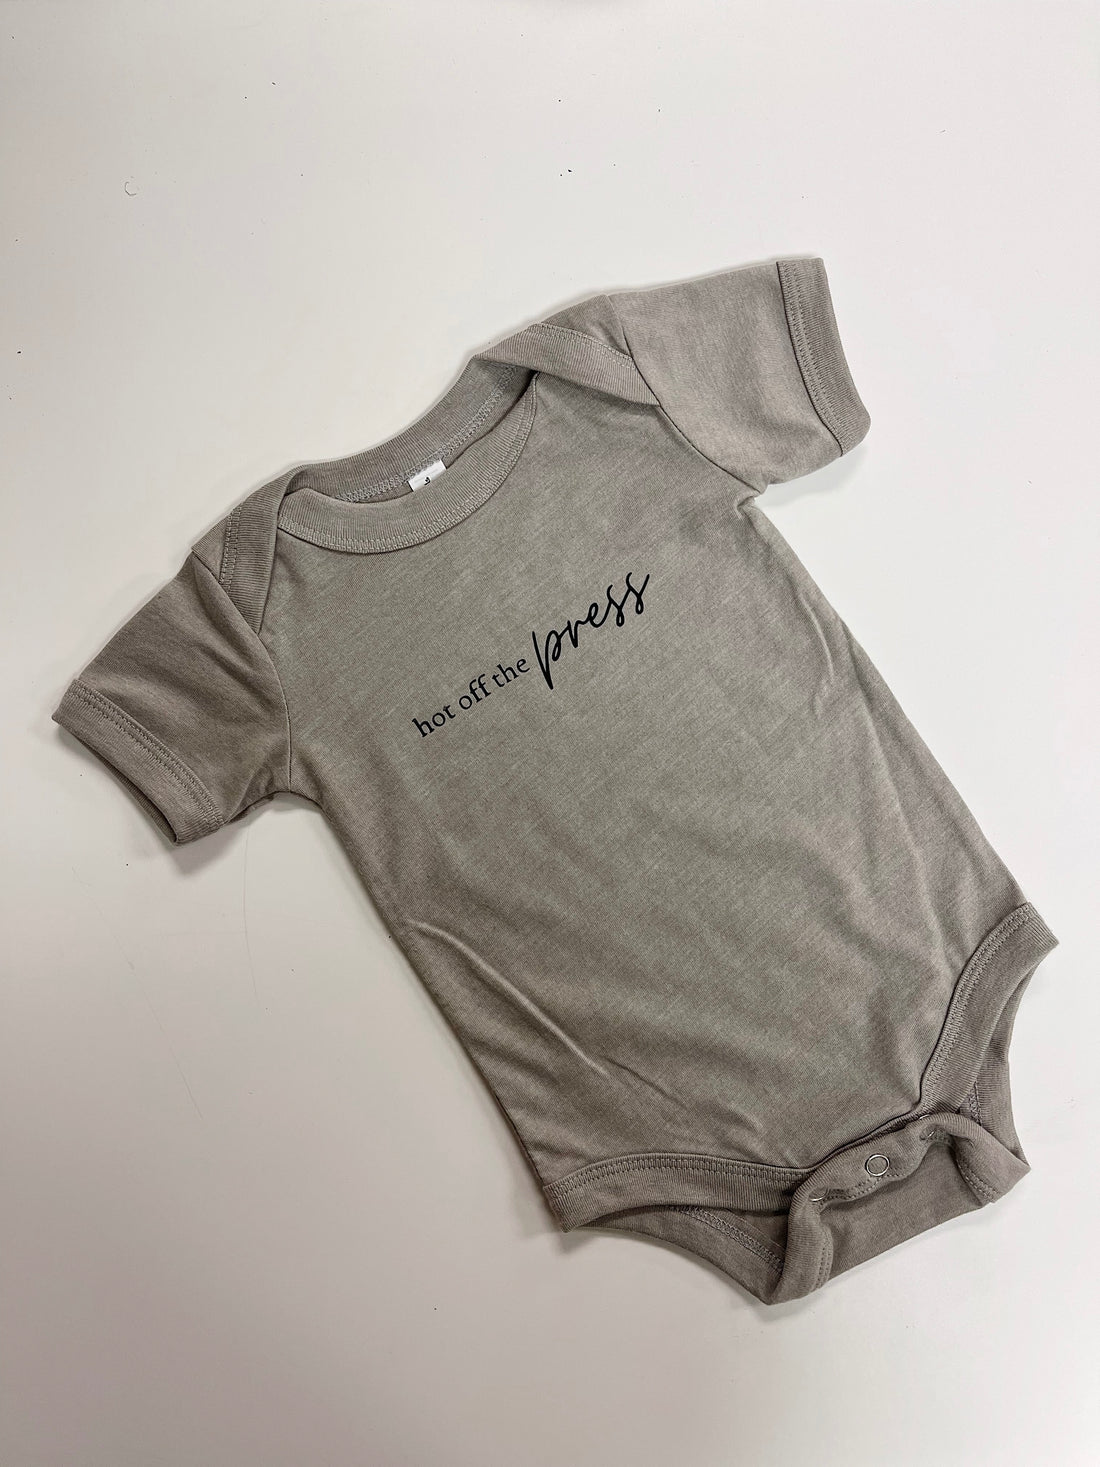 Hot off the press baby onesie in heather olive green